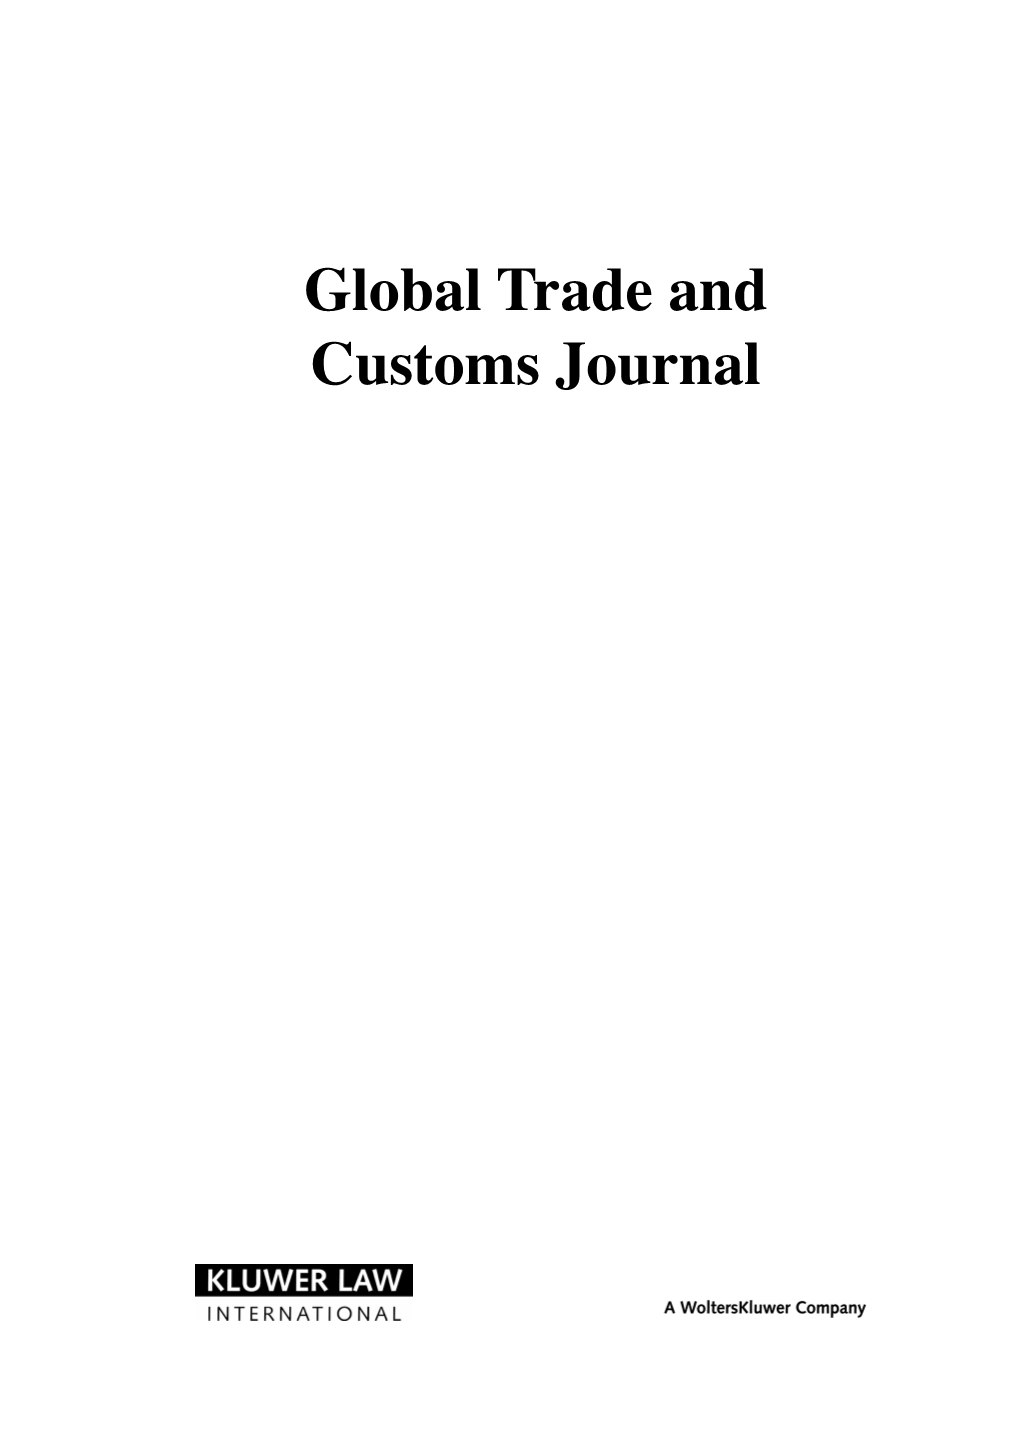 Global Trade and Customs Journal Published By: Kluwer Law International Kluwer Law International P.O